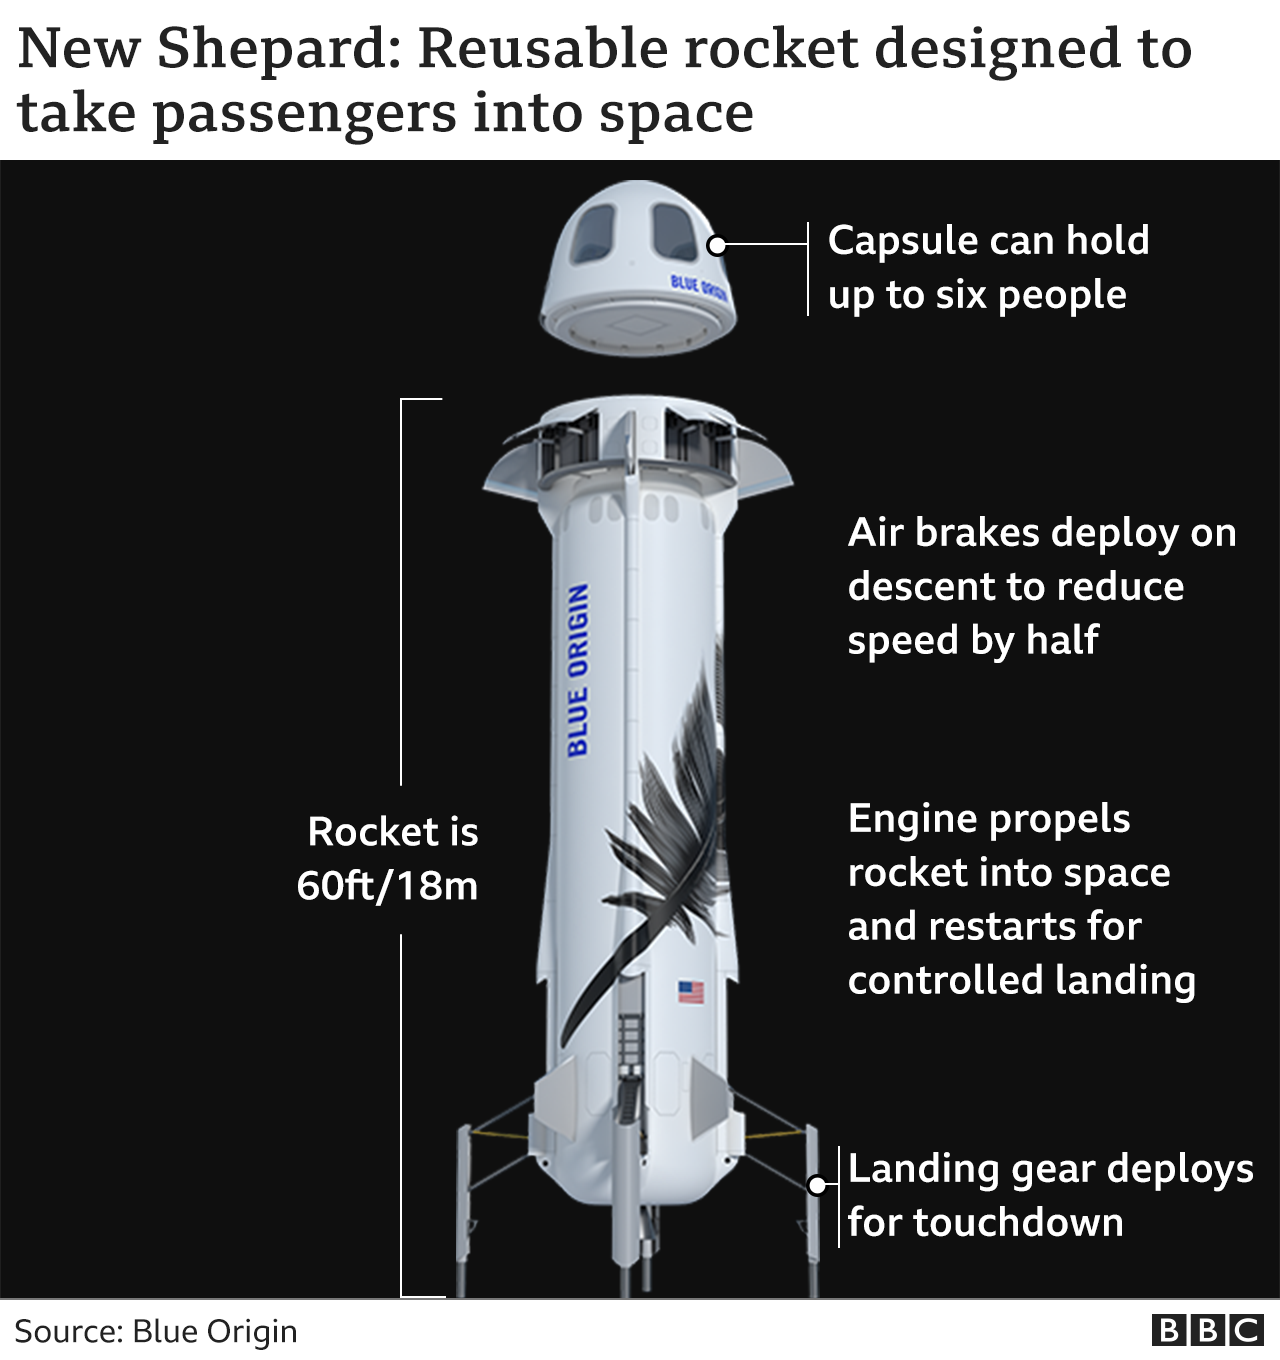 New Shepard rocket - annotated image